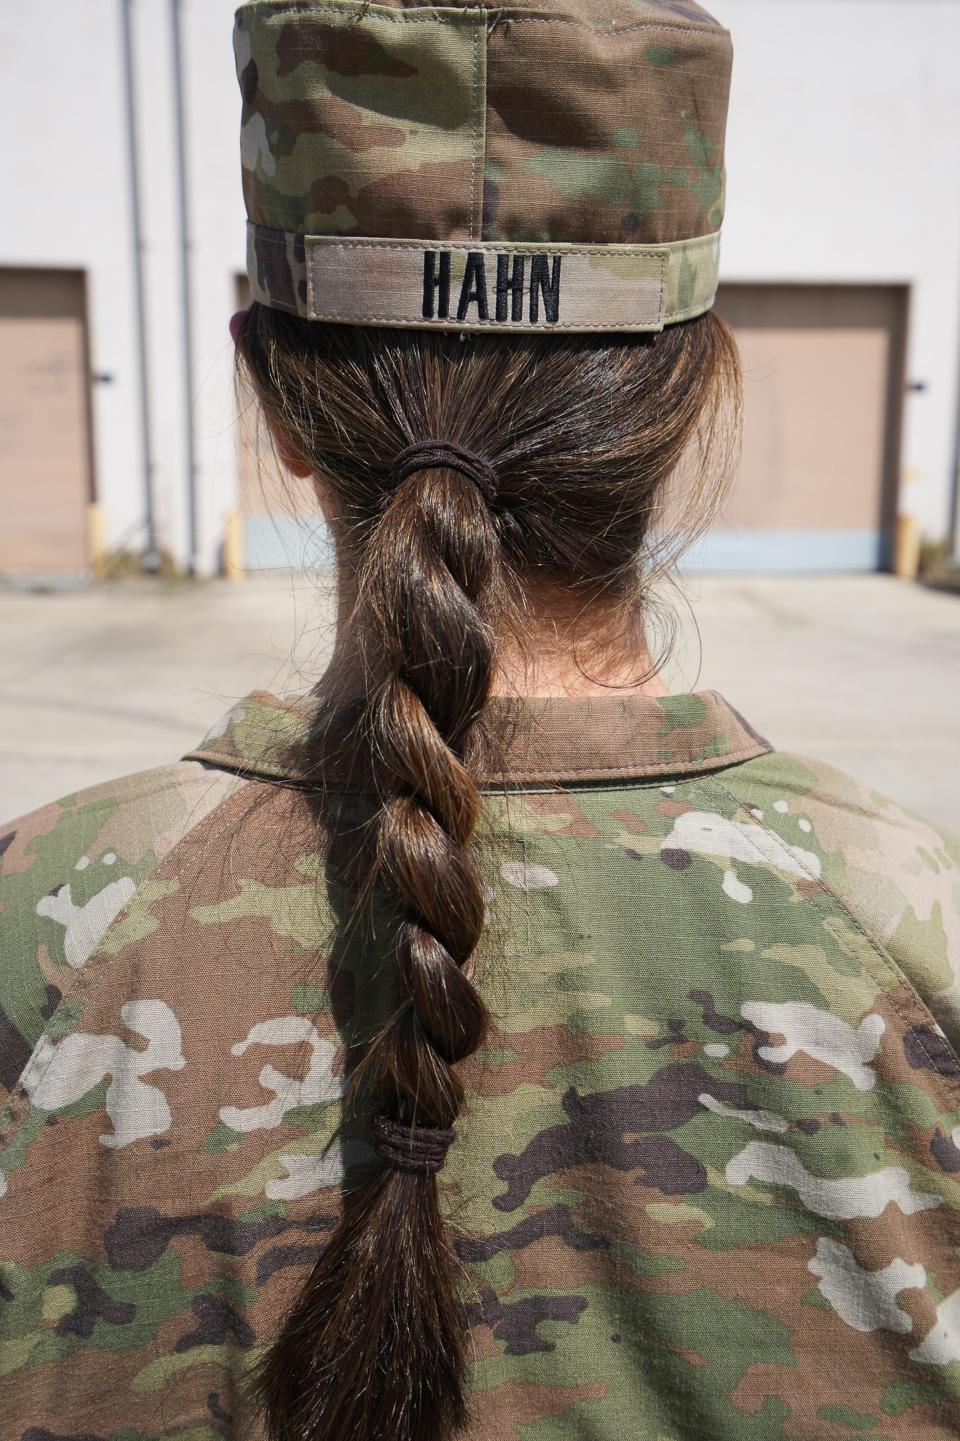 At 23,1st Lt. Delaney Hahn is a field artillery officer and commands a team of mostly men at Fort Stewart on March 21, 2023, in Georgia. The military recently allowed women to wear braids, which Hahn said was a great relief when she has her helmet on.